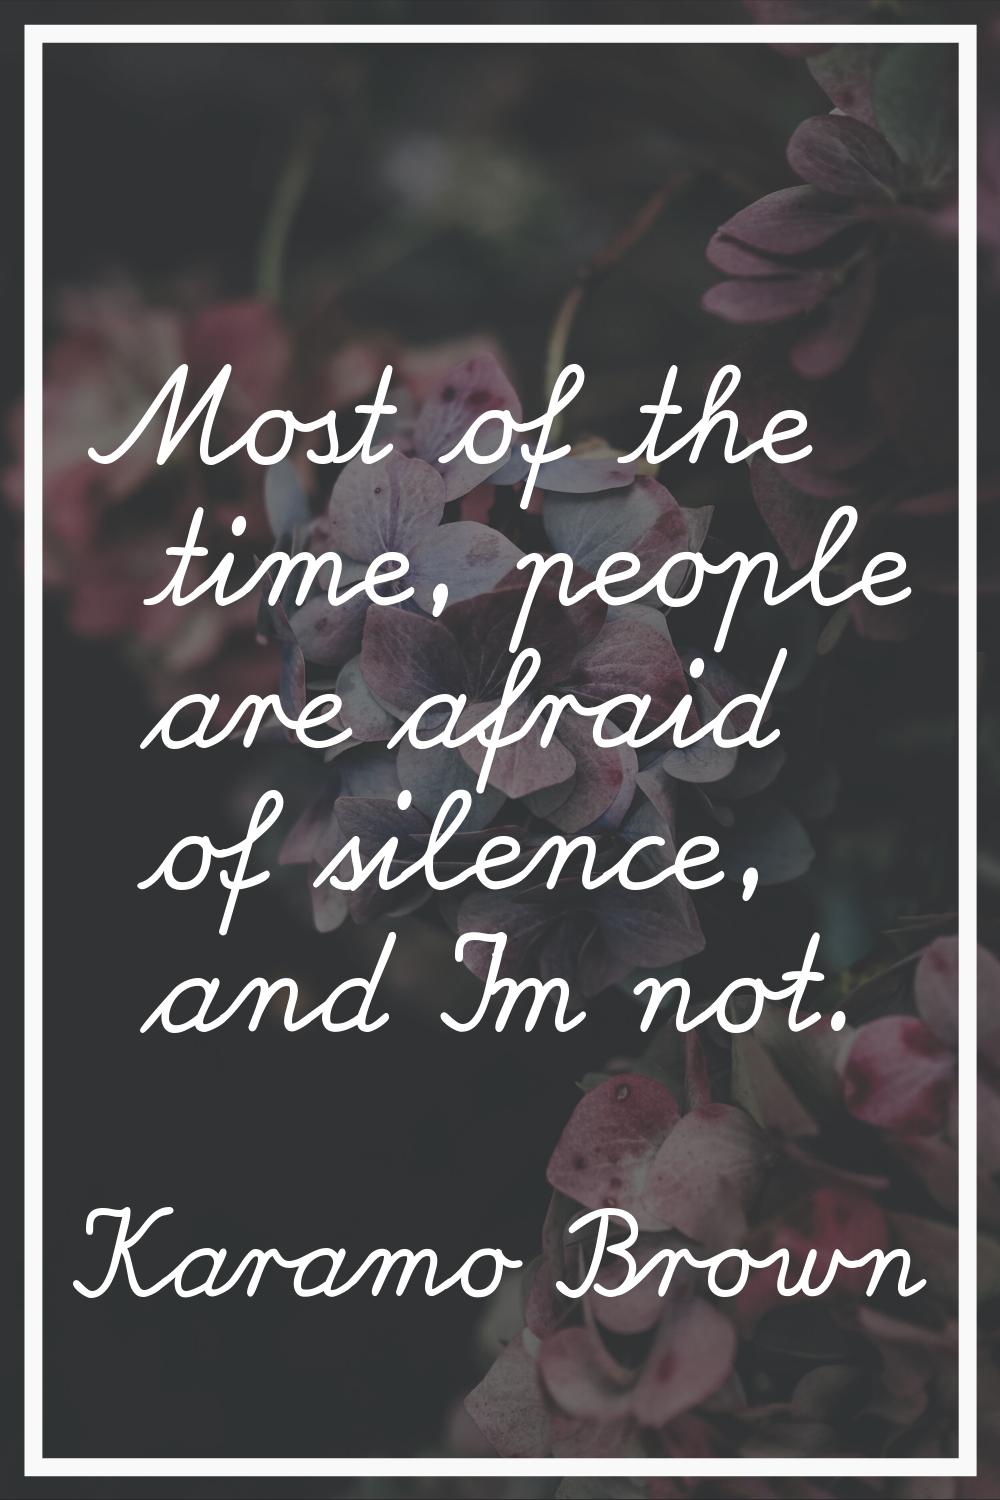 Most of the time, people are afraid of silence, and I'm not.